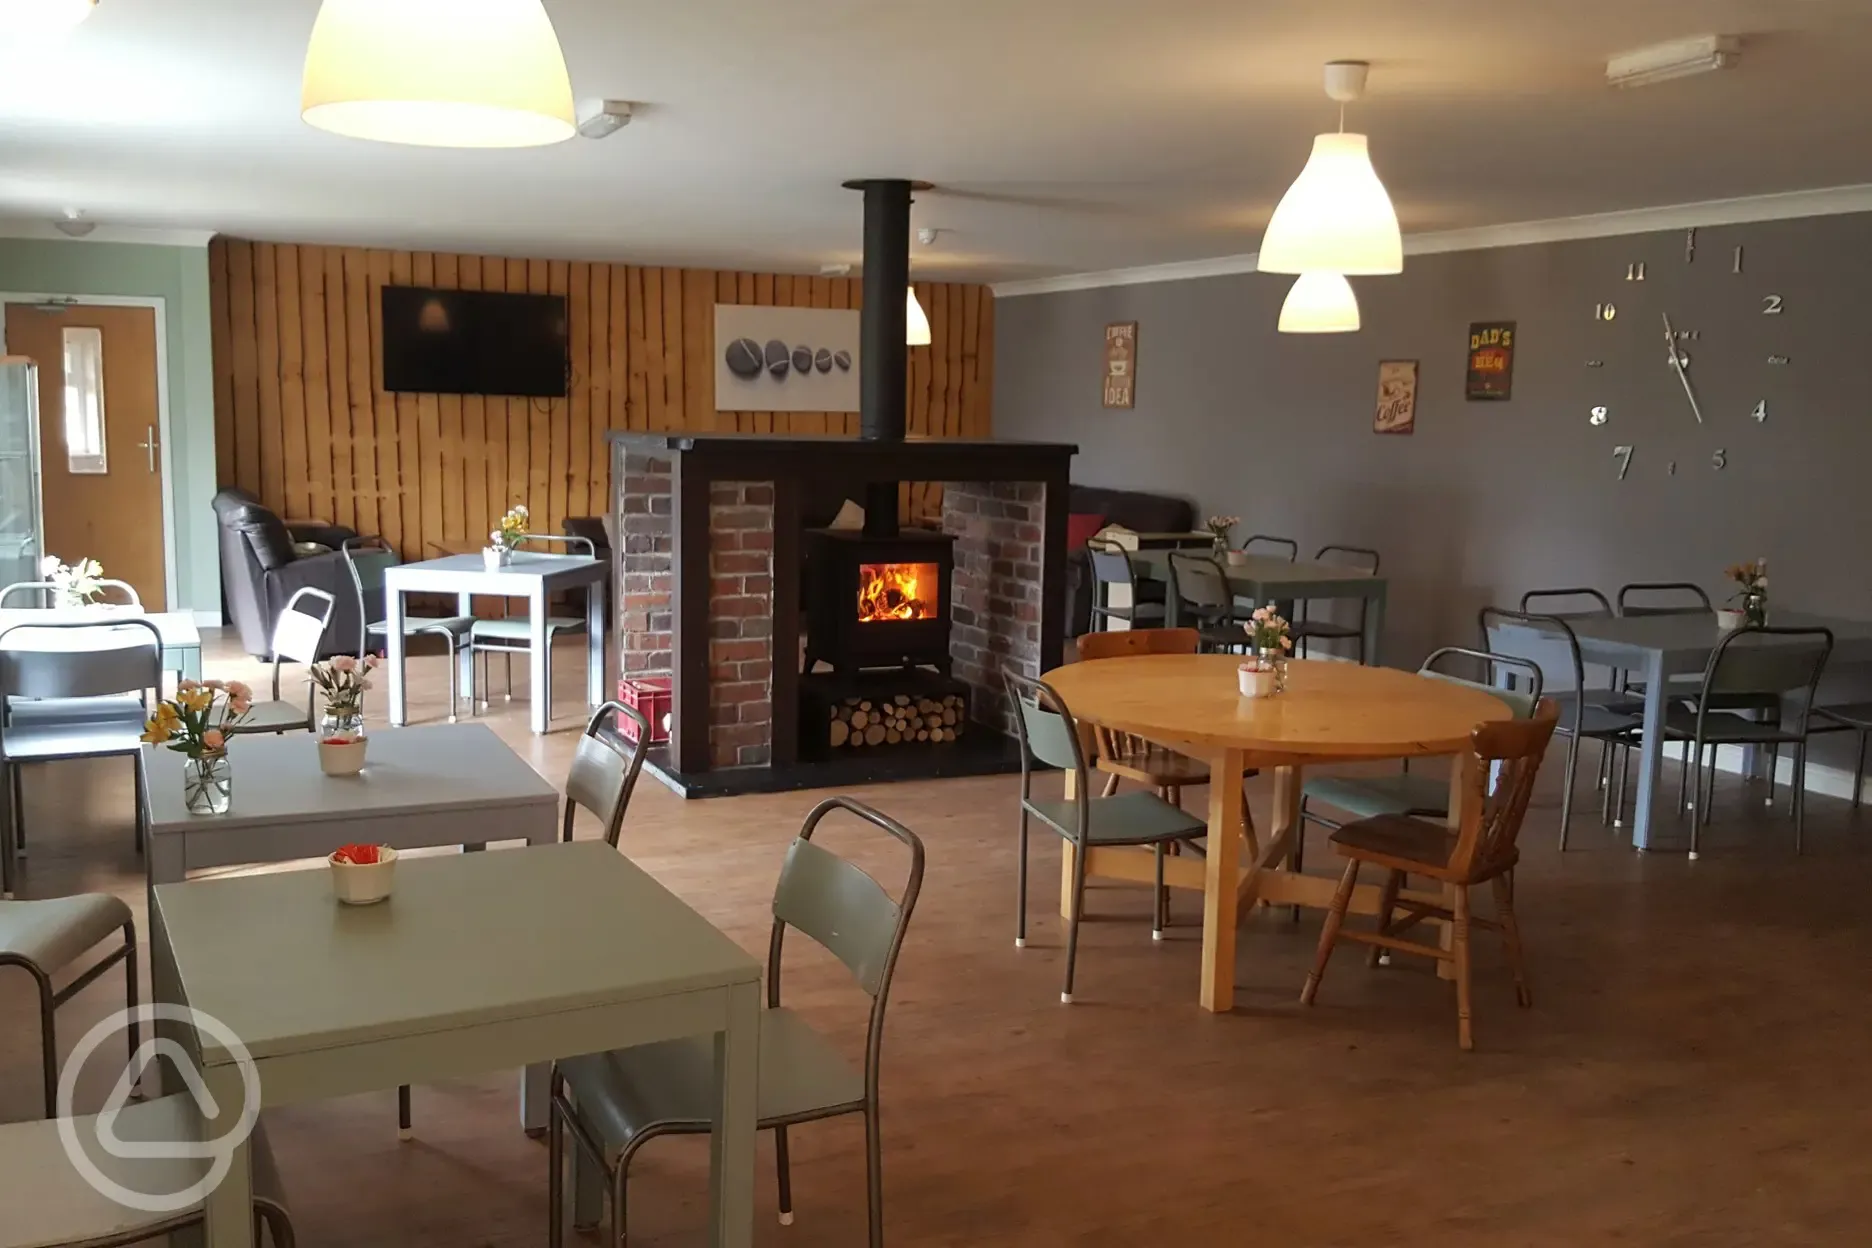 Warm fire in The Cwtch Cafe at Acorn